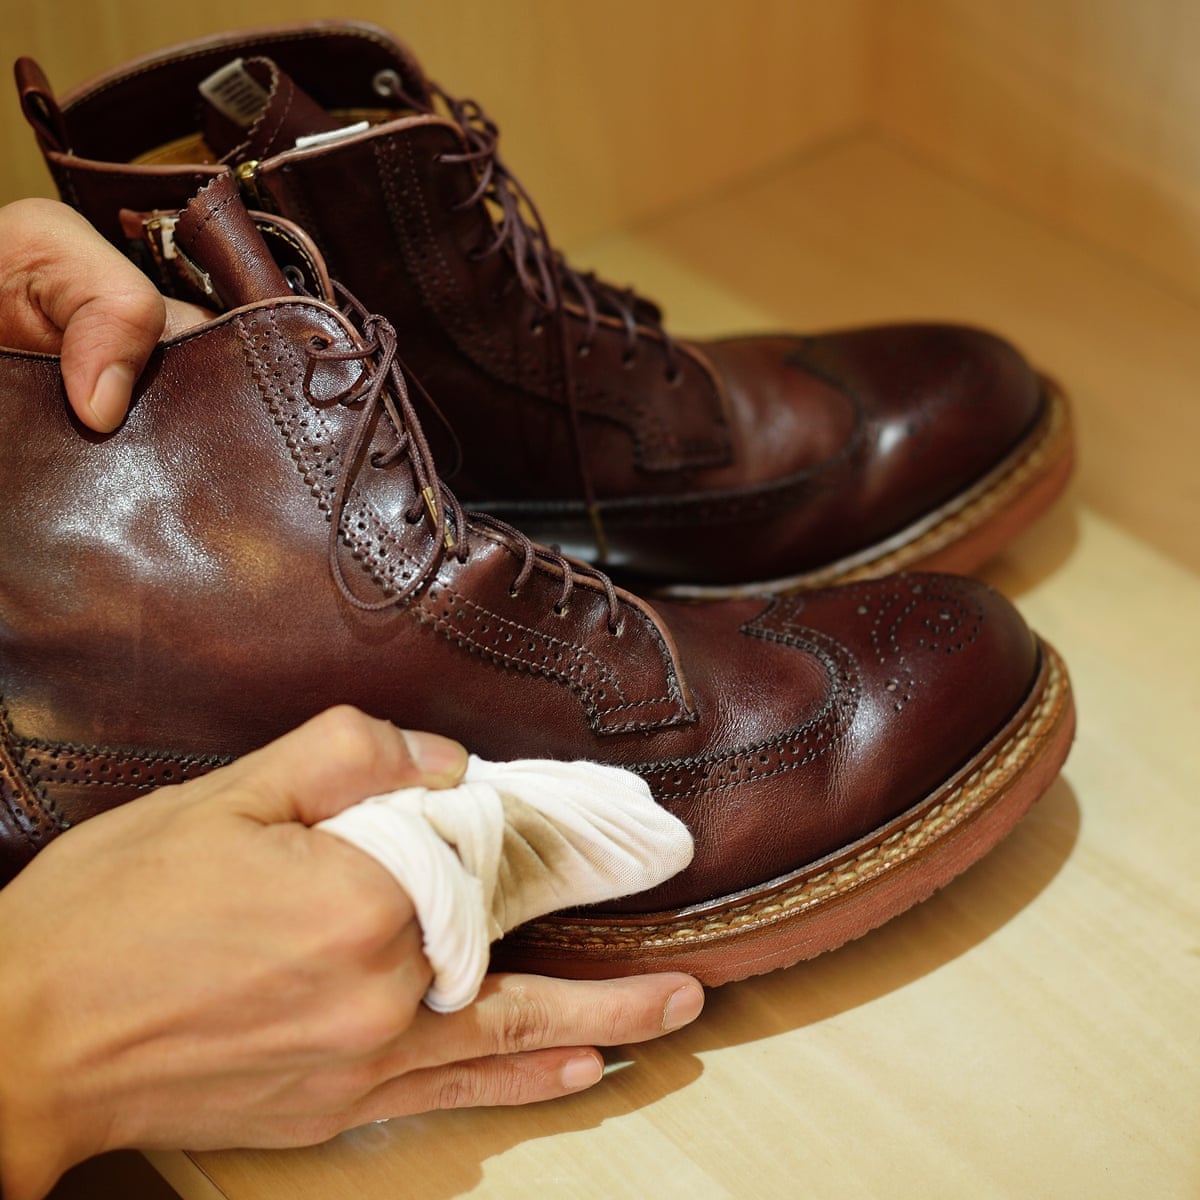 Swell for leather: how to properly take care of shoes and sneakers |  Women's shoes | The Guardian